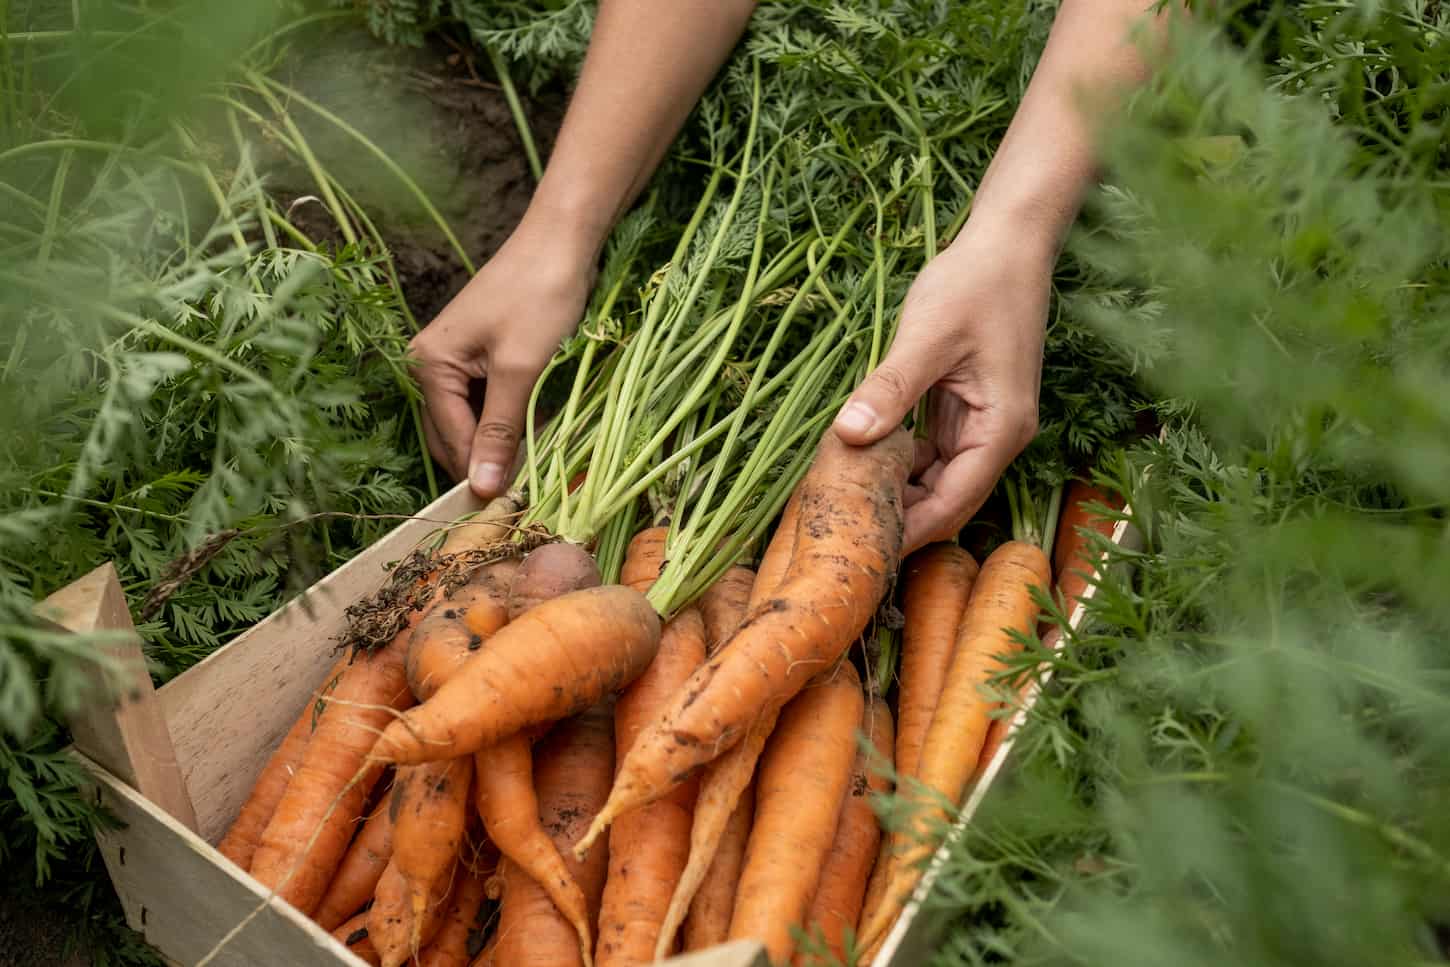 An image of an unrecognizable farmer putting carrots into the box while harvesting crops at a plantation.